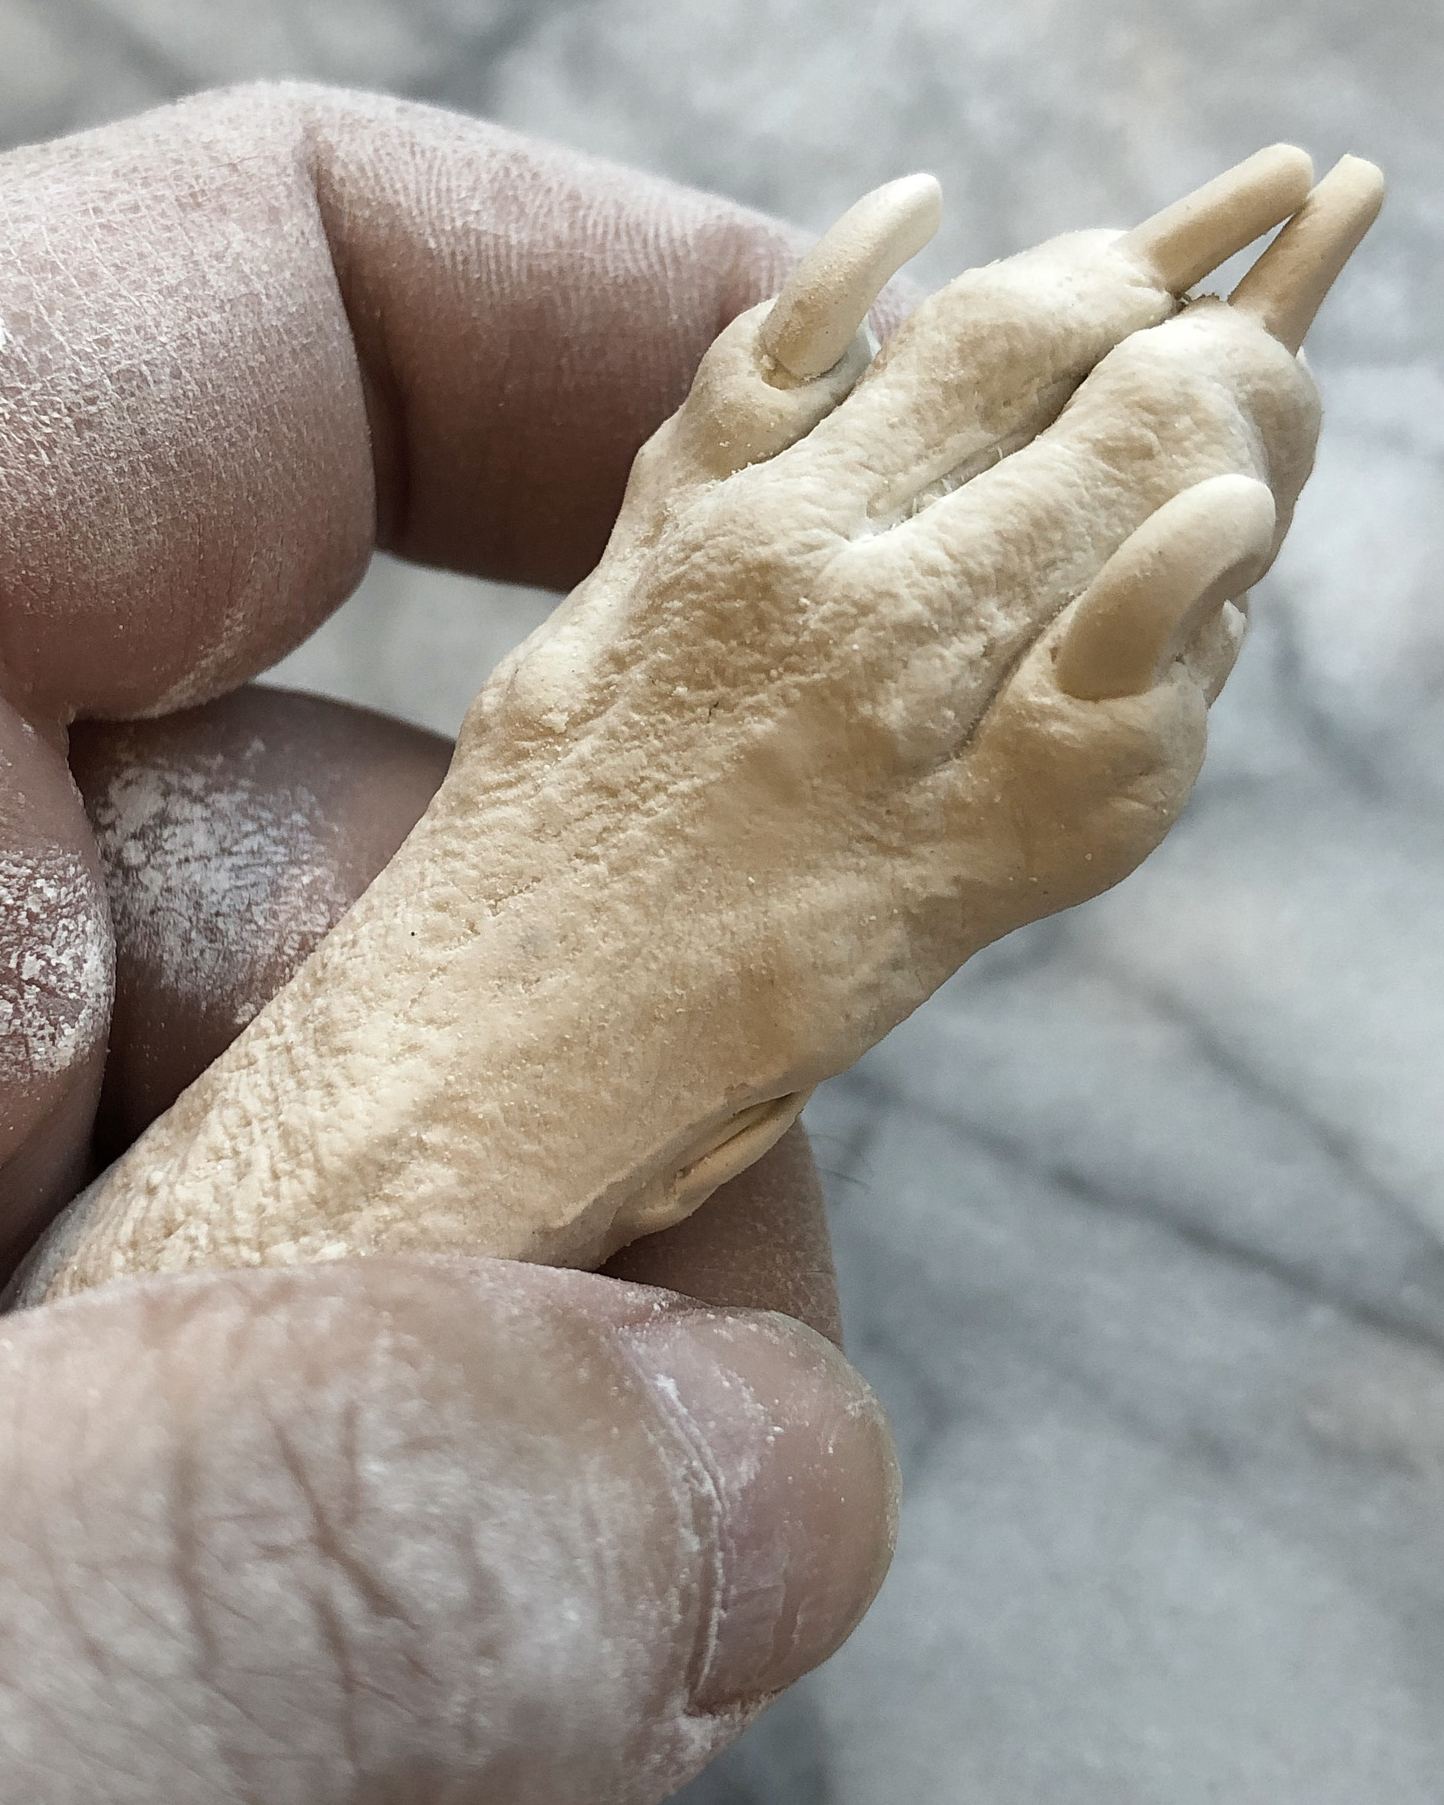 Cast of a small dog's paw being held in a person's hand